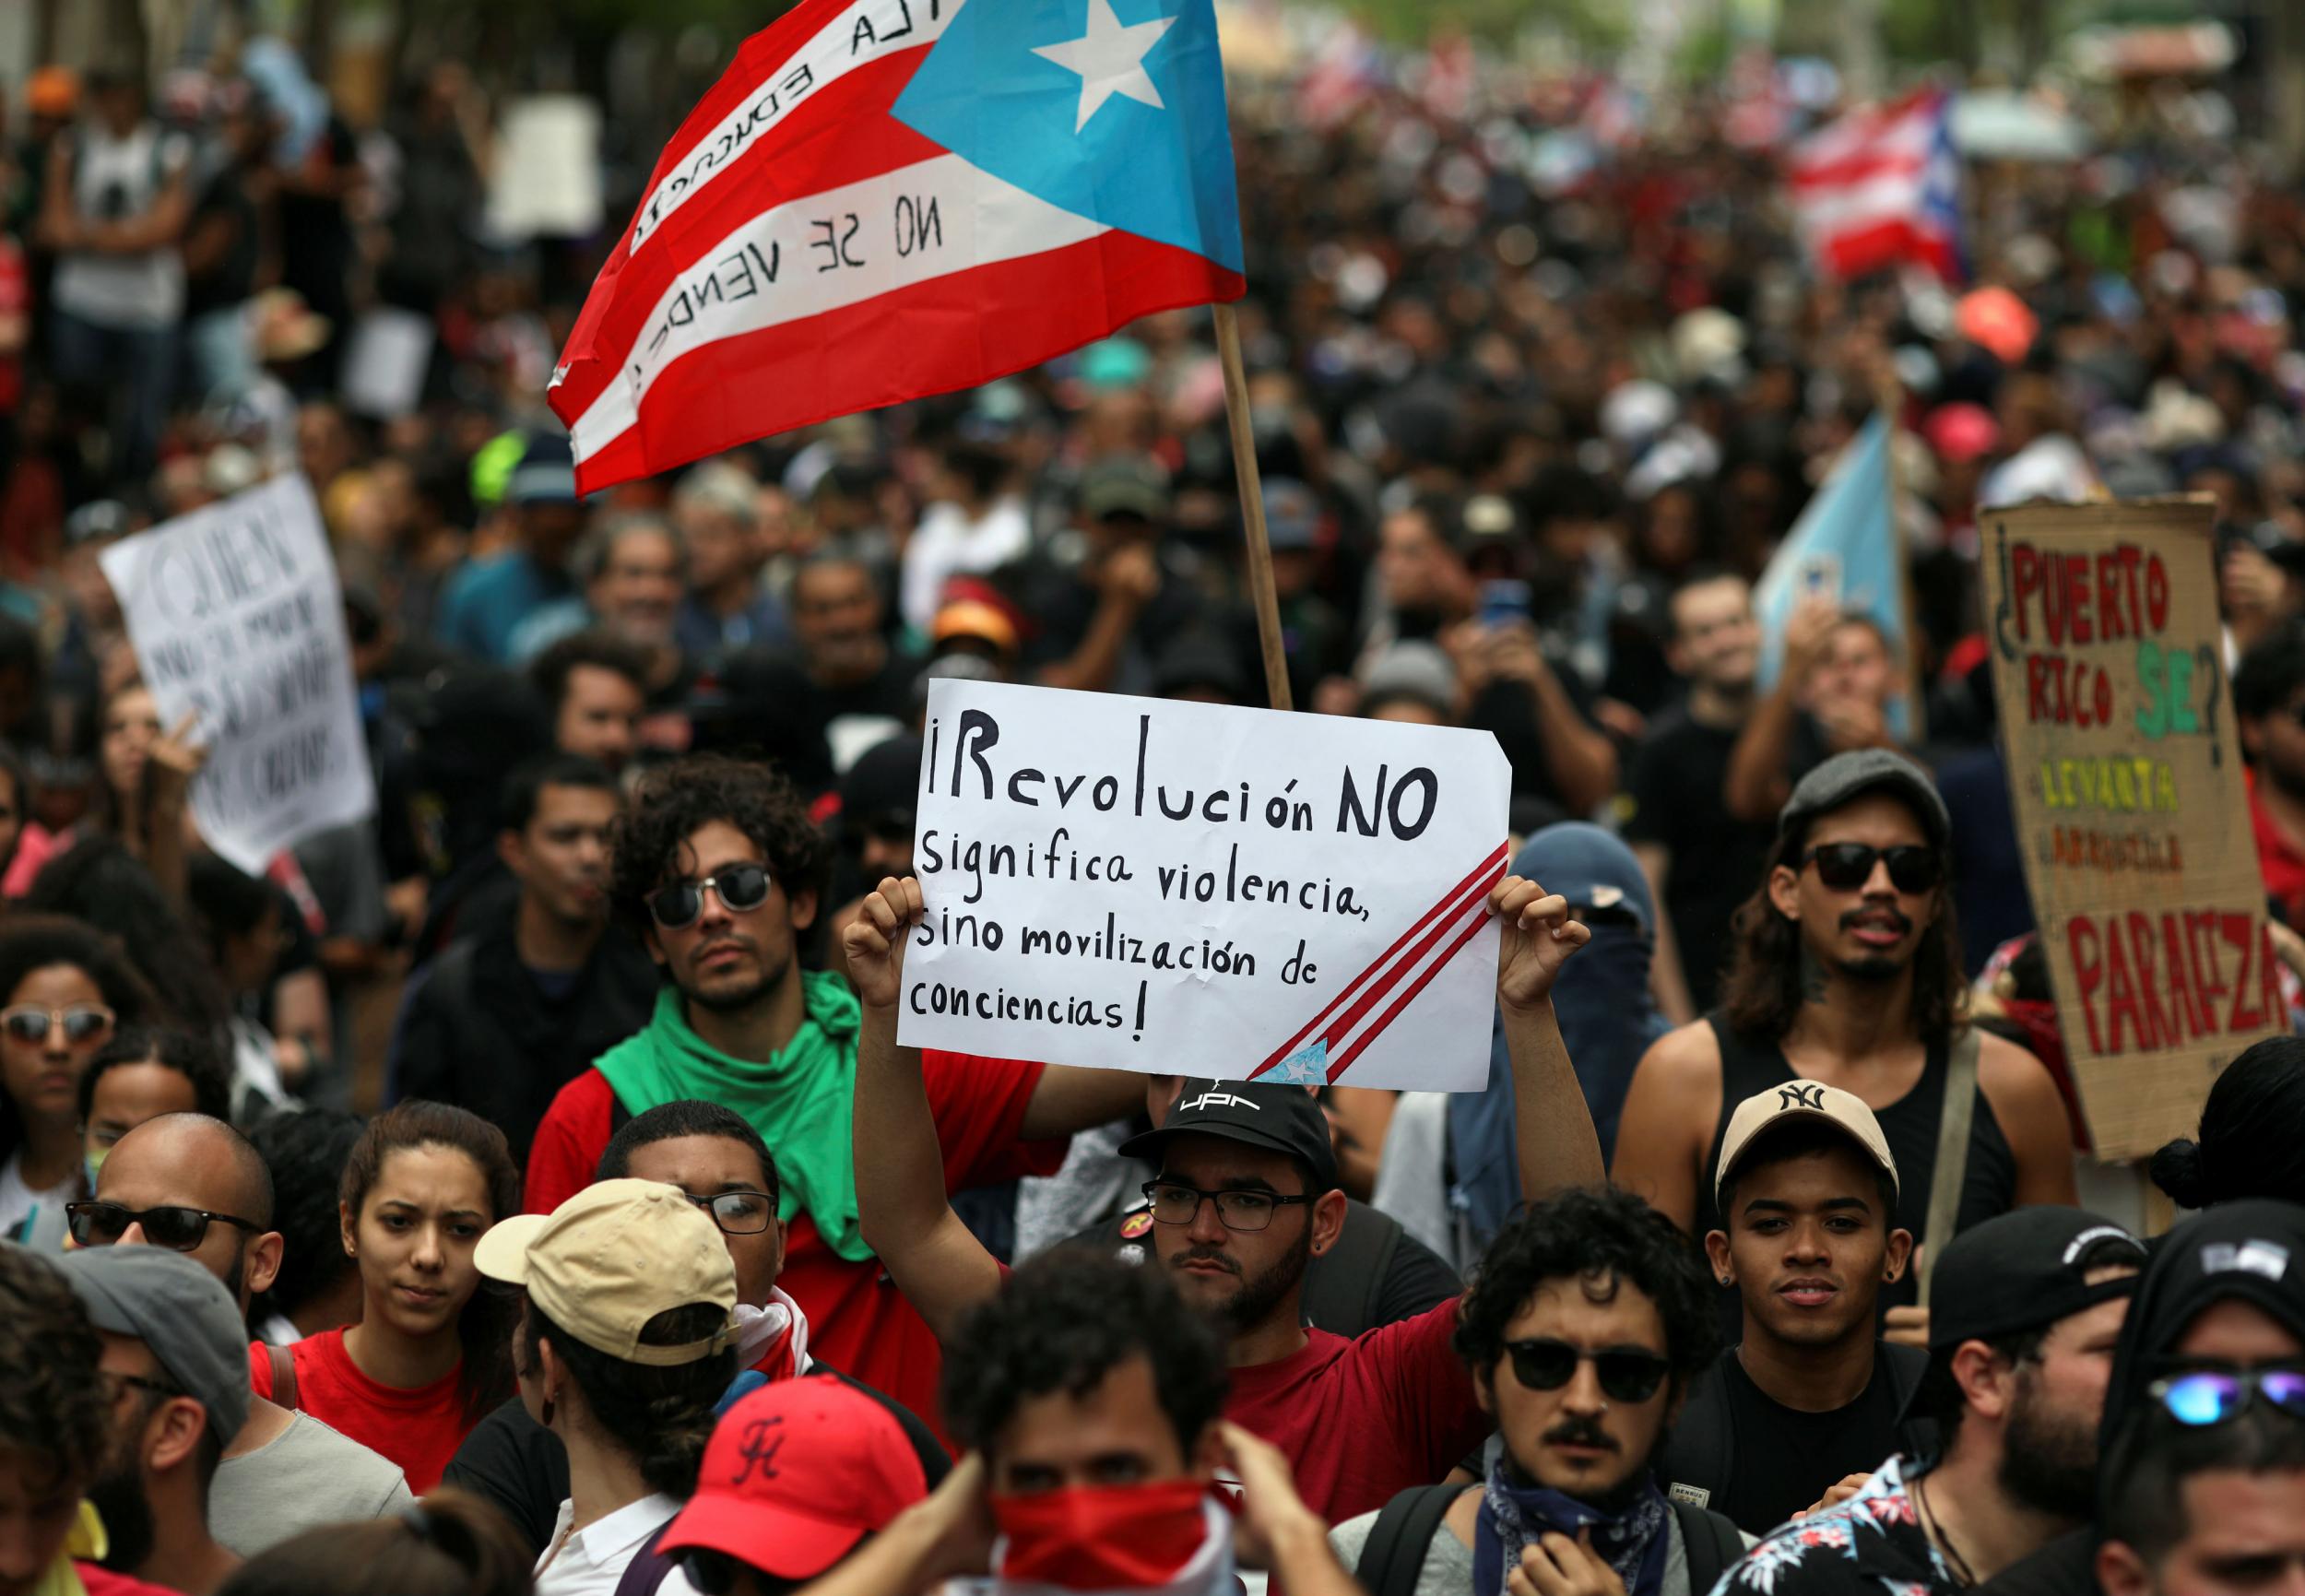 Marchers in San Juan on May Day last week protest austerity measures imposed by the federal fiscal board